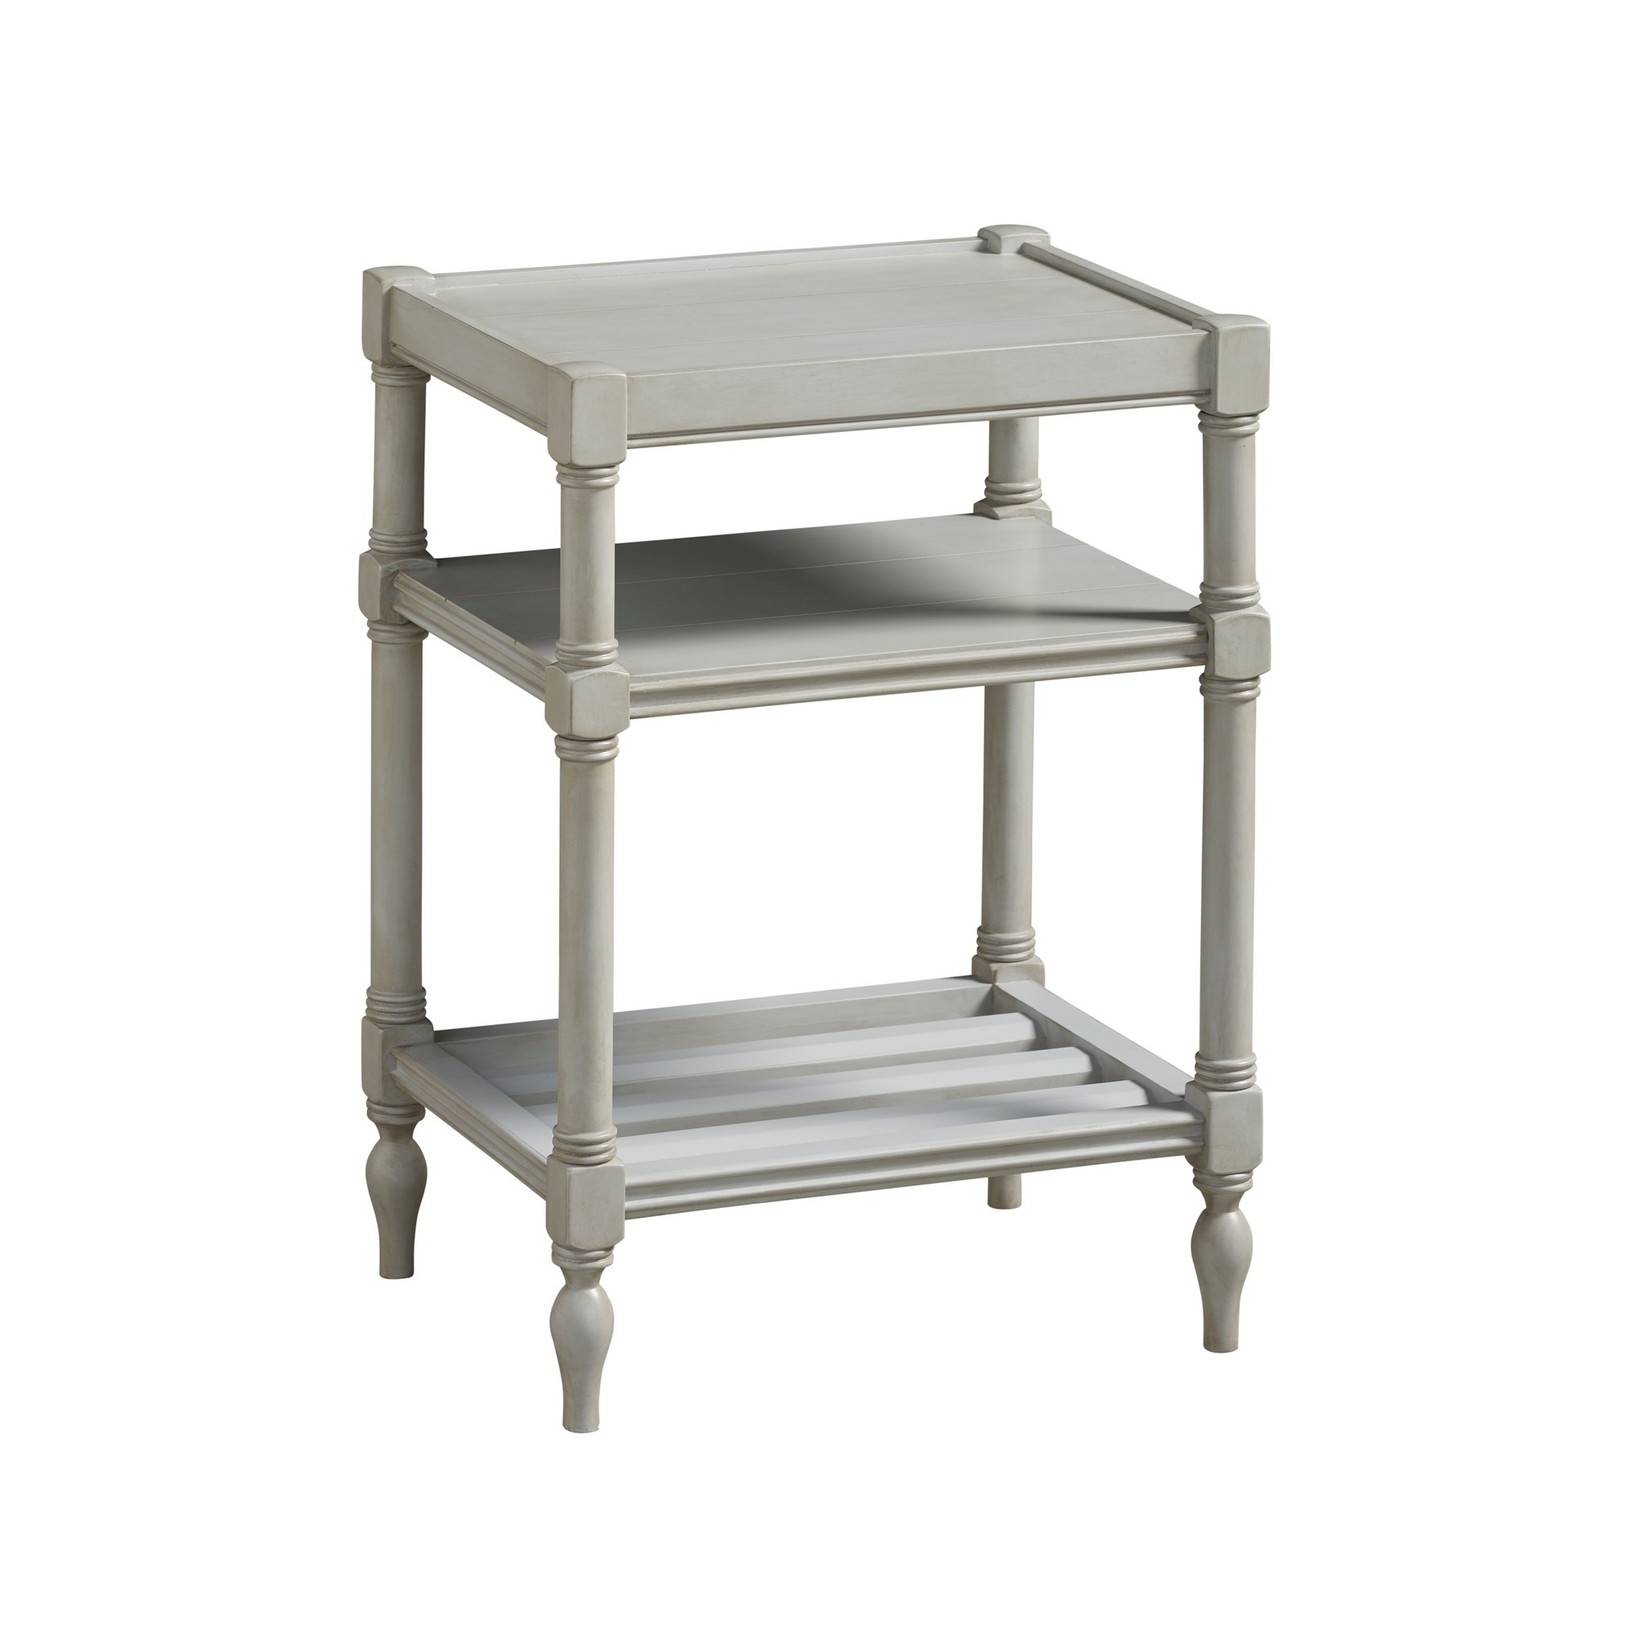 Summerhill Chair Side Table - French Gray